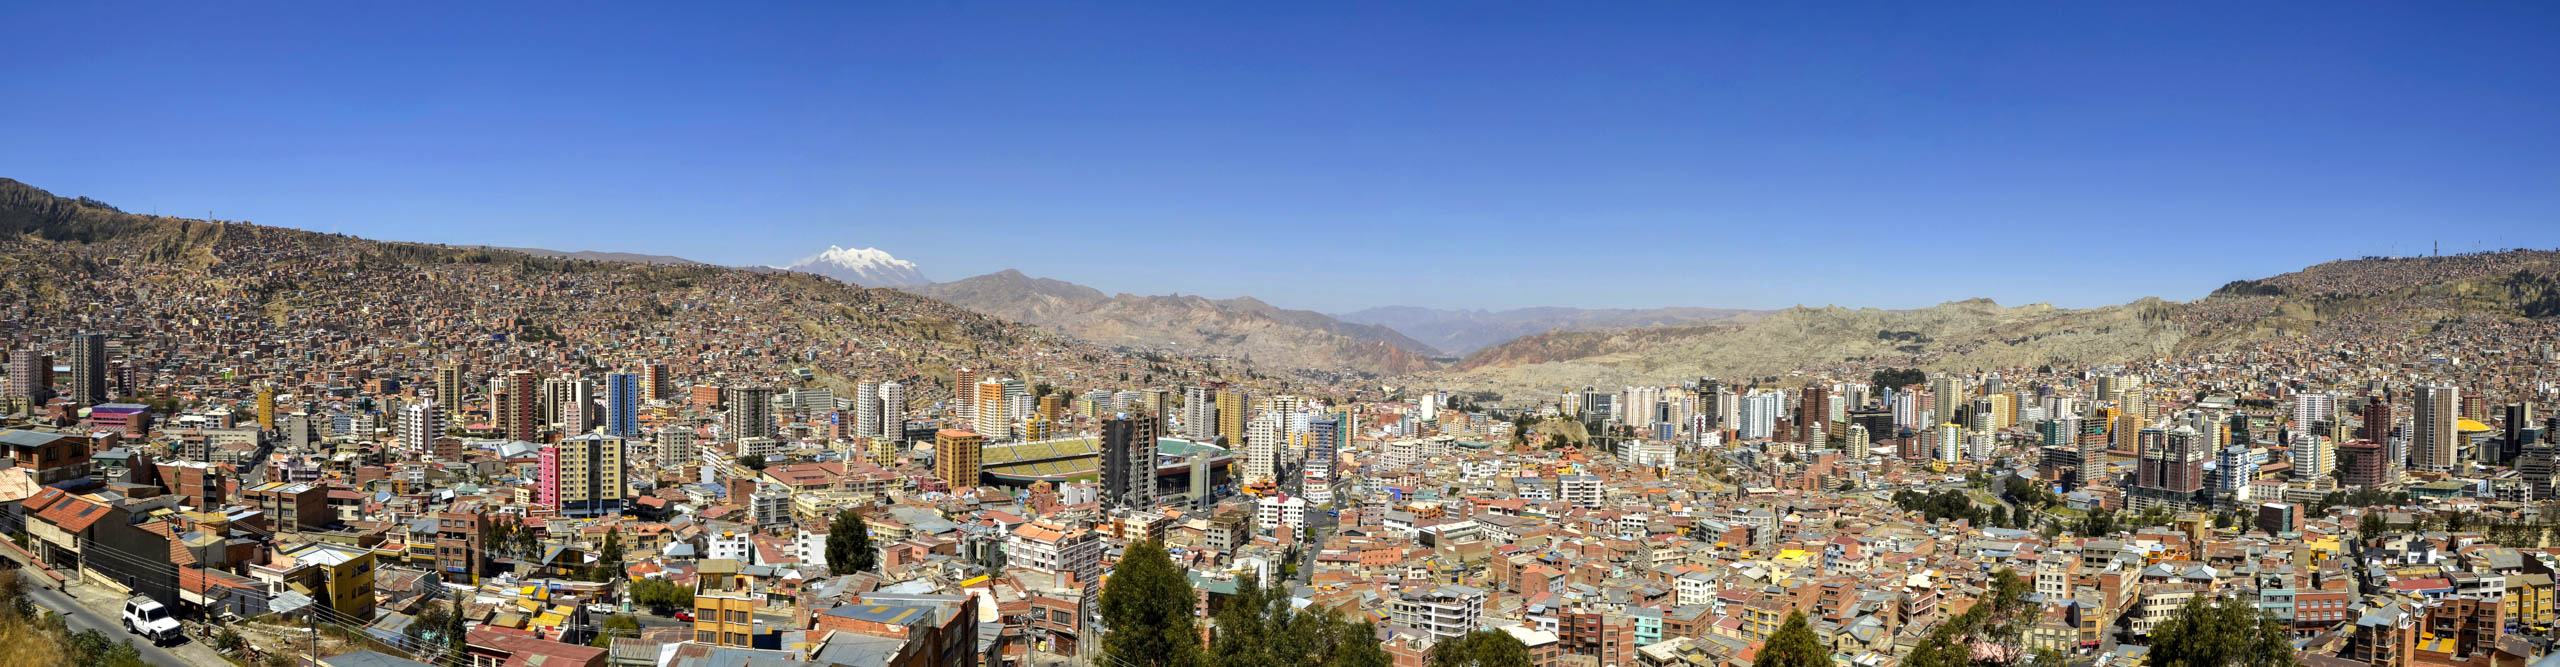 View of the skyline of La Paz and the mountains, with a clear blue sky on a sunny day, Bolivia